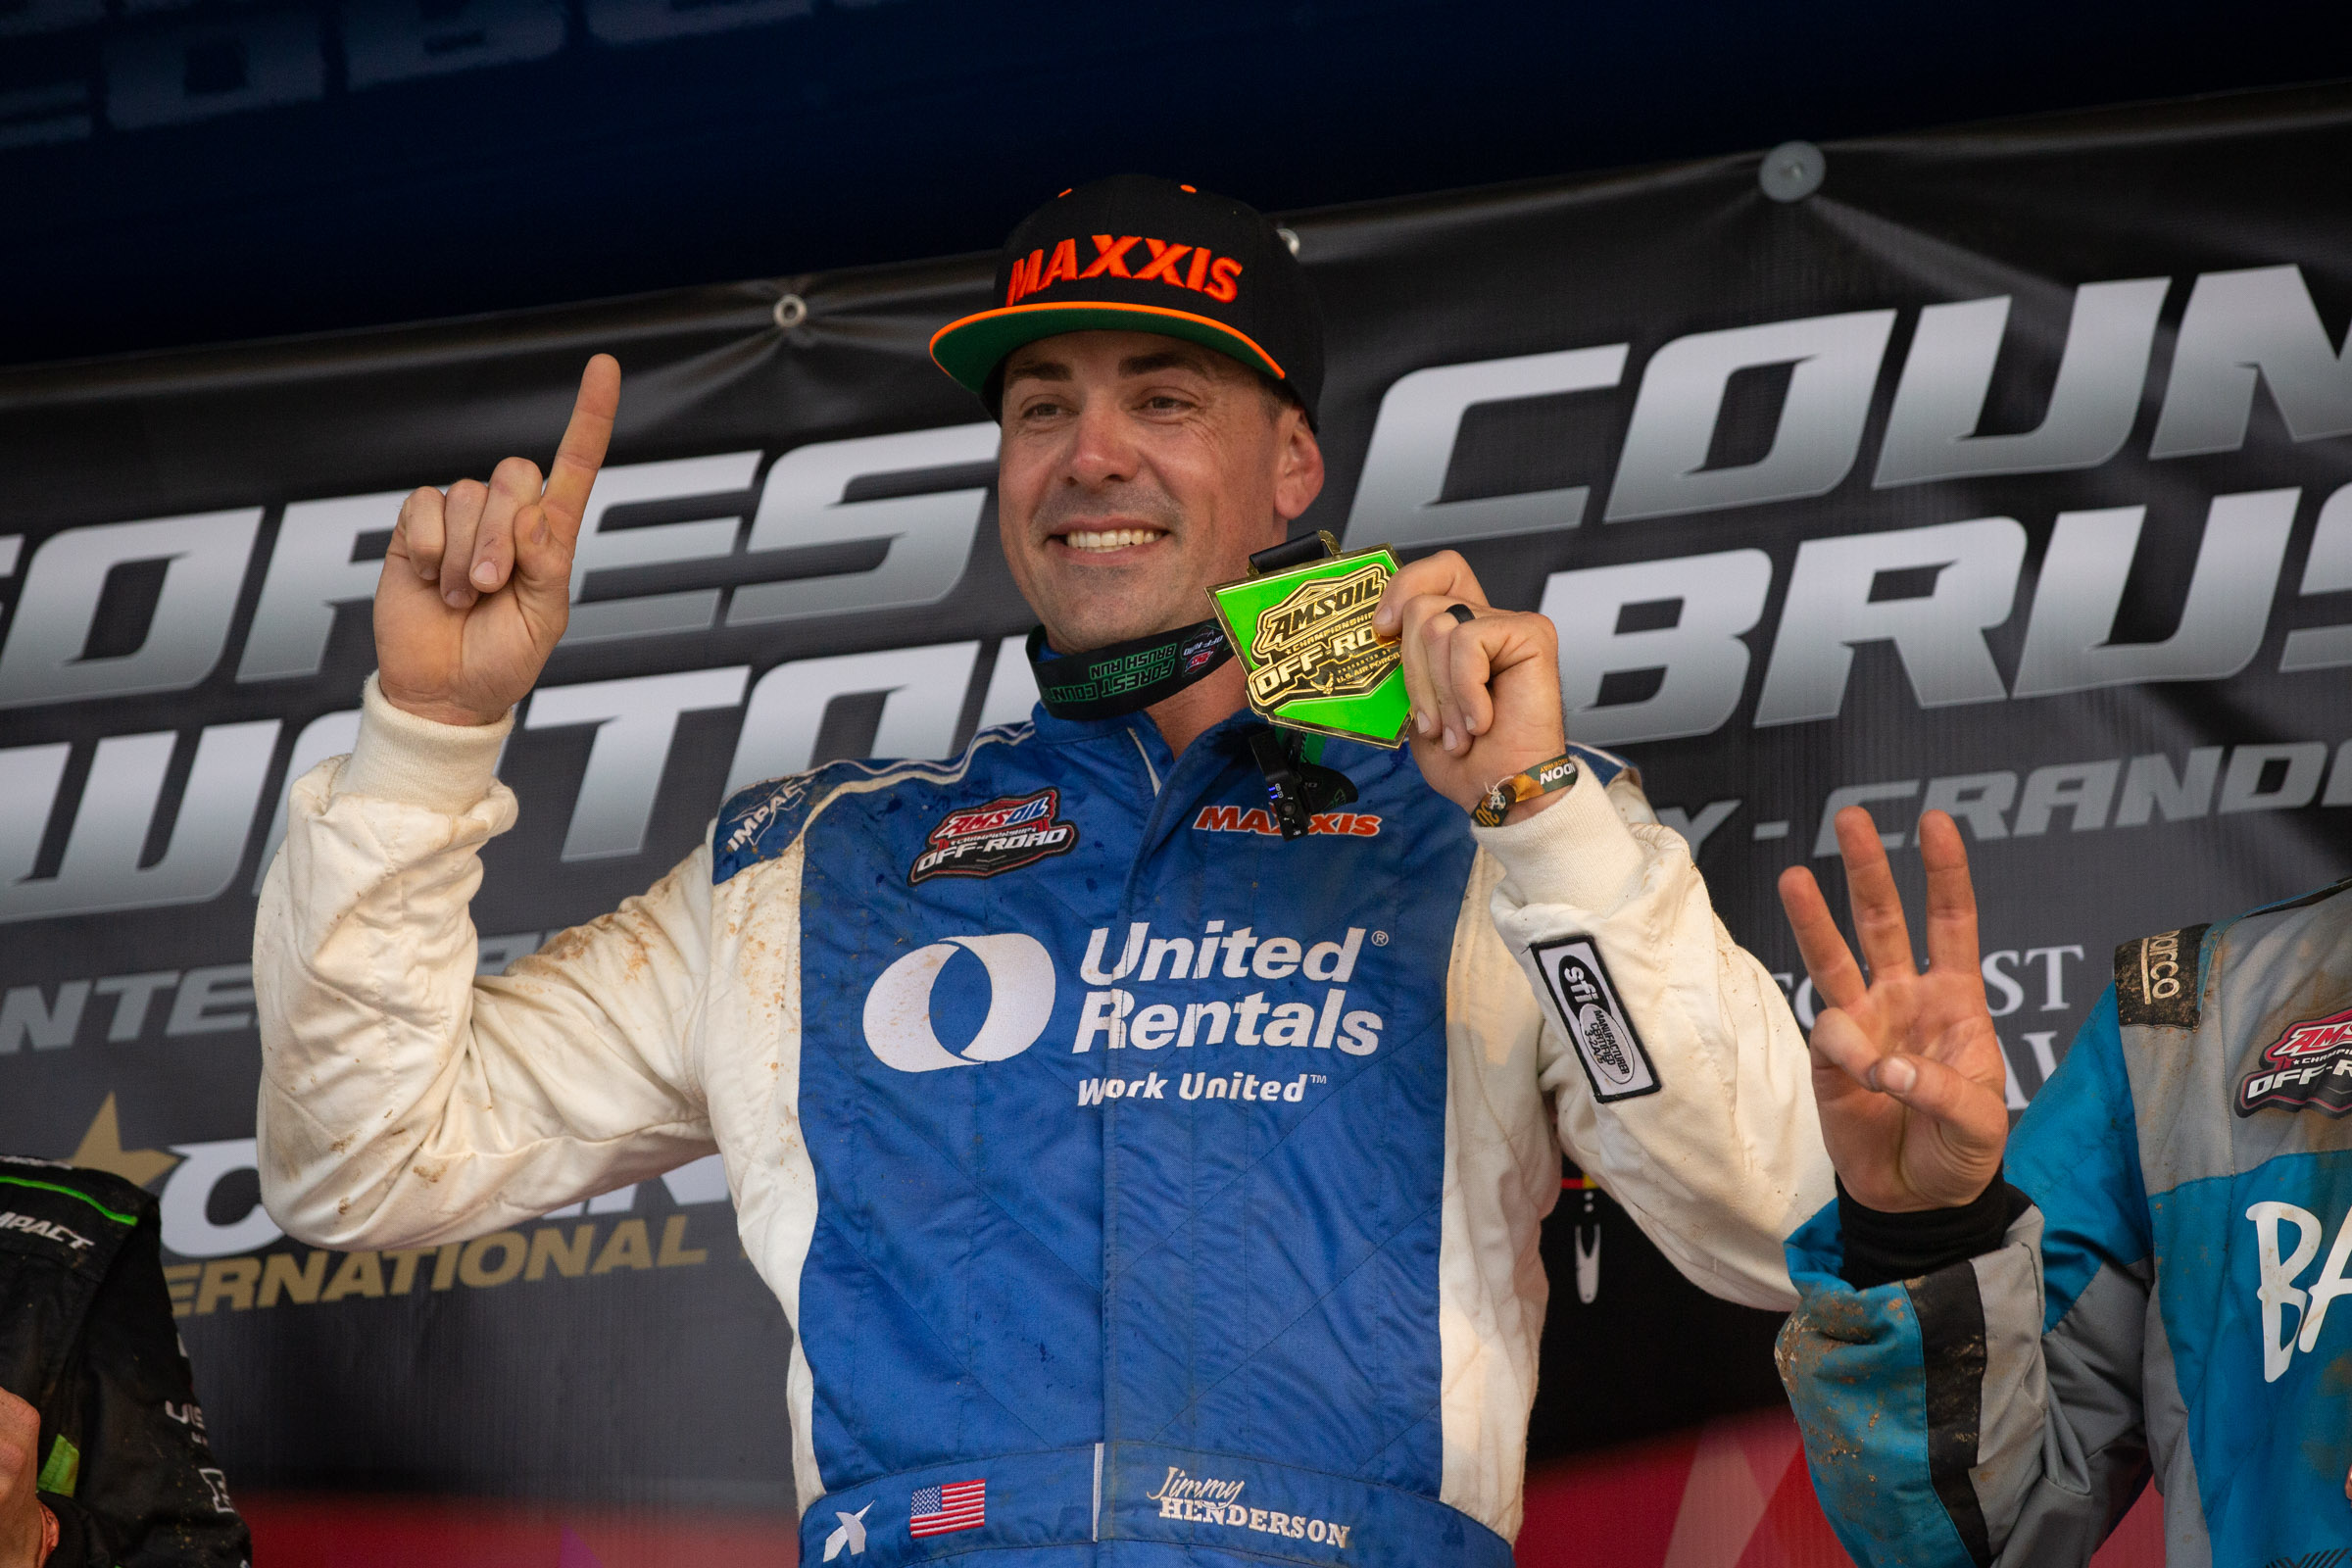 Jimmy Henderson celebrating his win at AMSOIL Championship Off-Road Rounds 3 and 4, held June 24-25 in Crandon, Wisconsin.